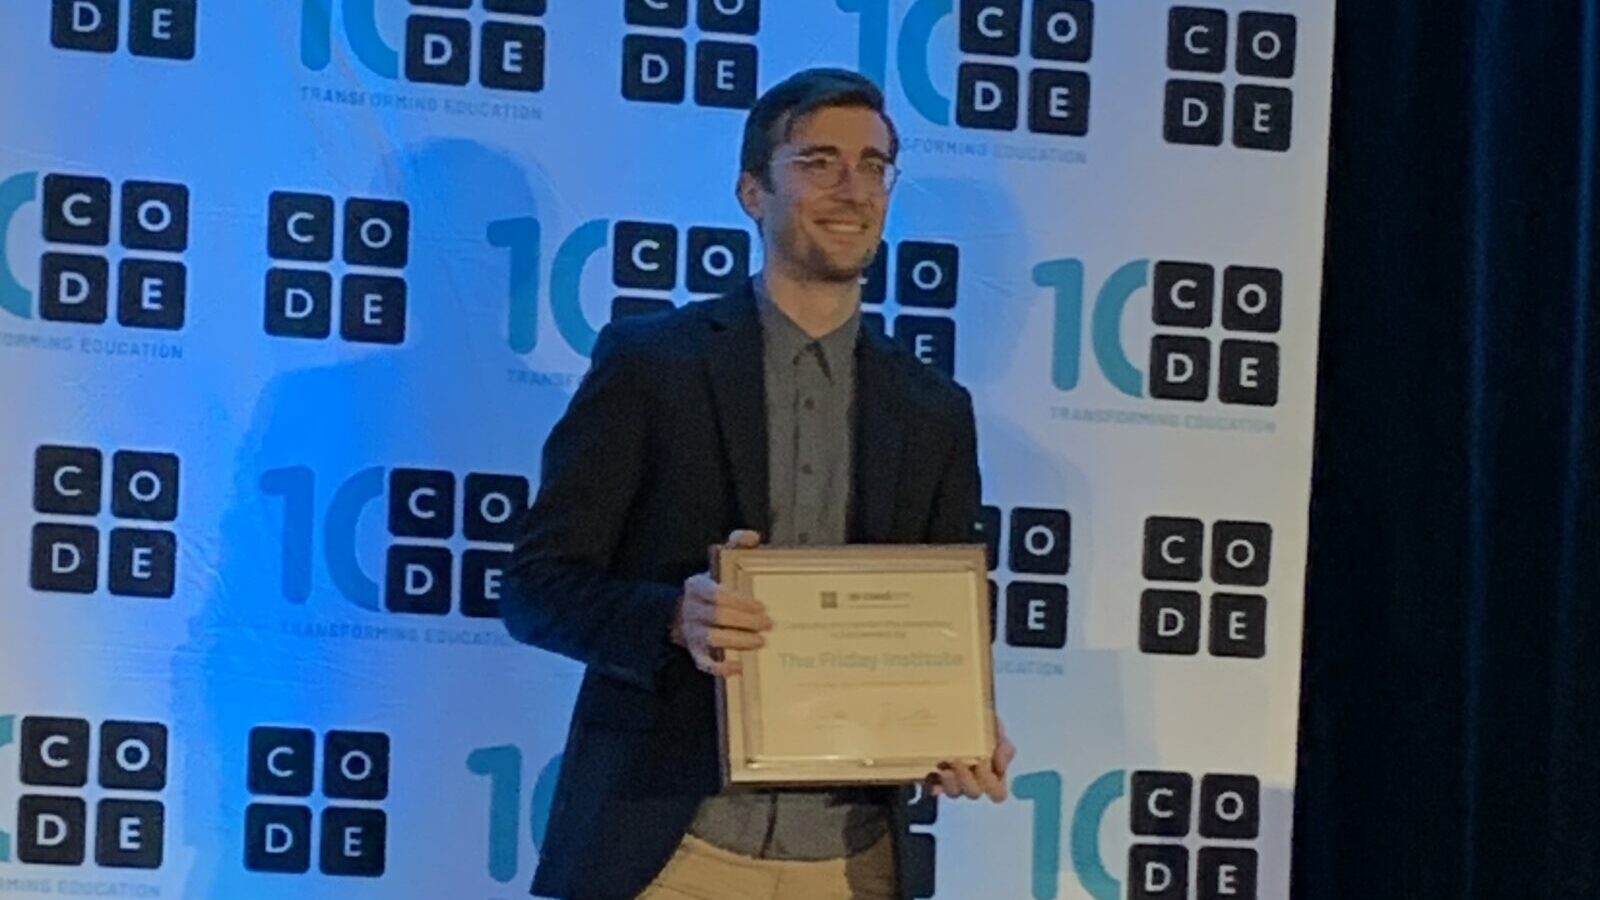 A man with short brown hair and blazer holds up a certificate in from of a Code.org step and repeat background